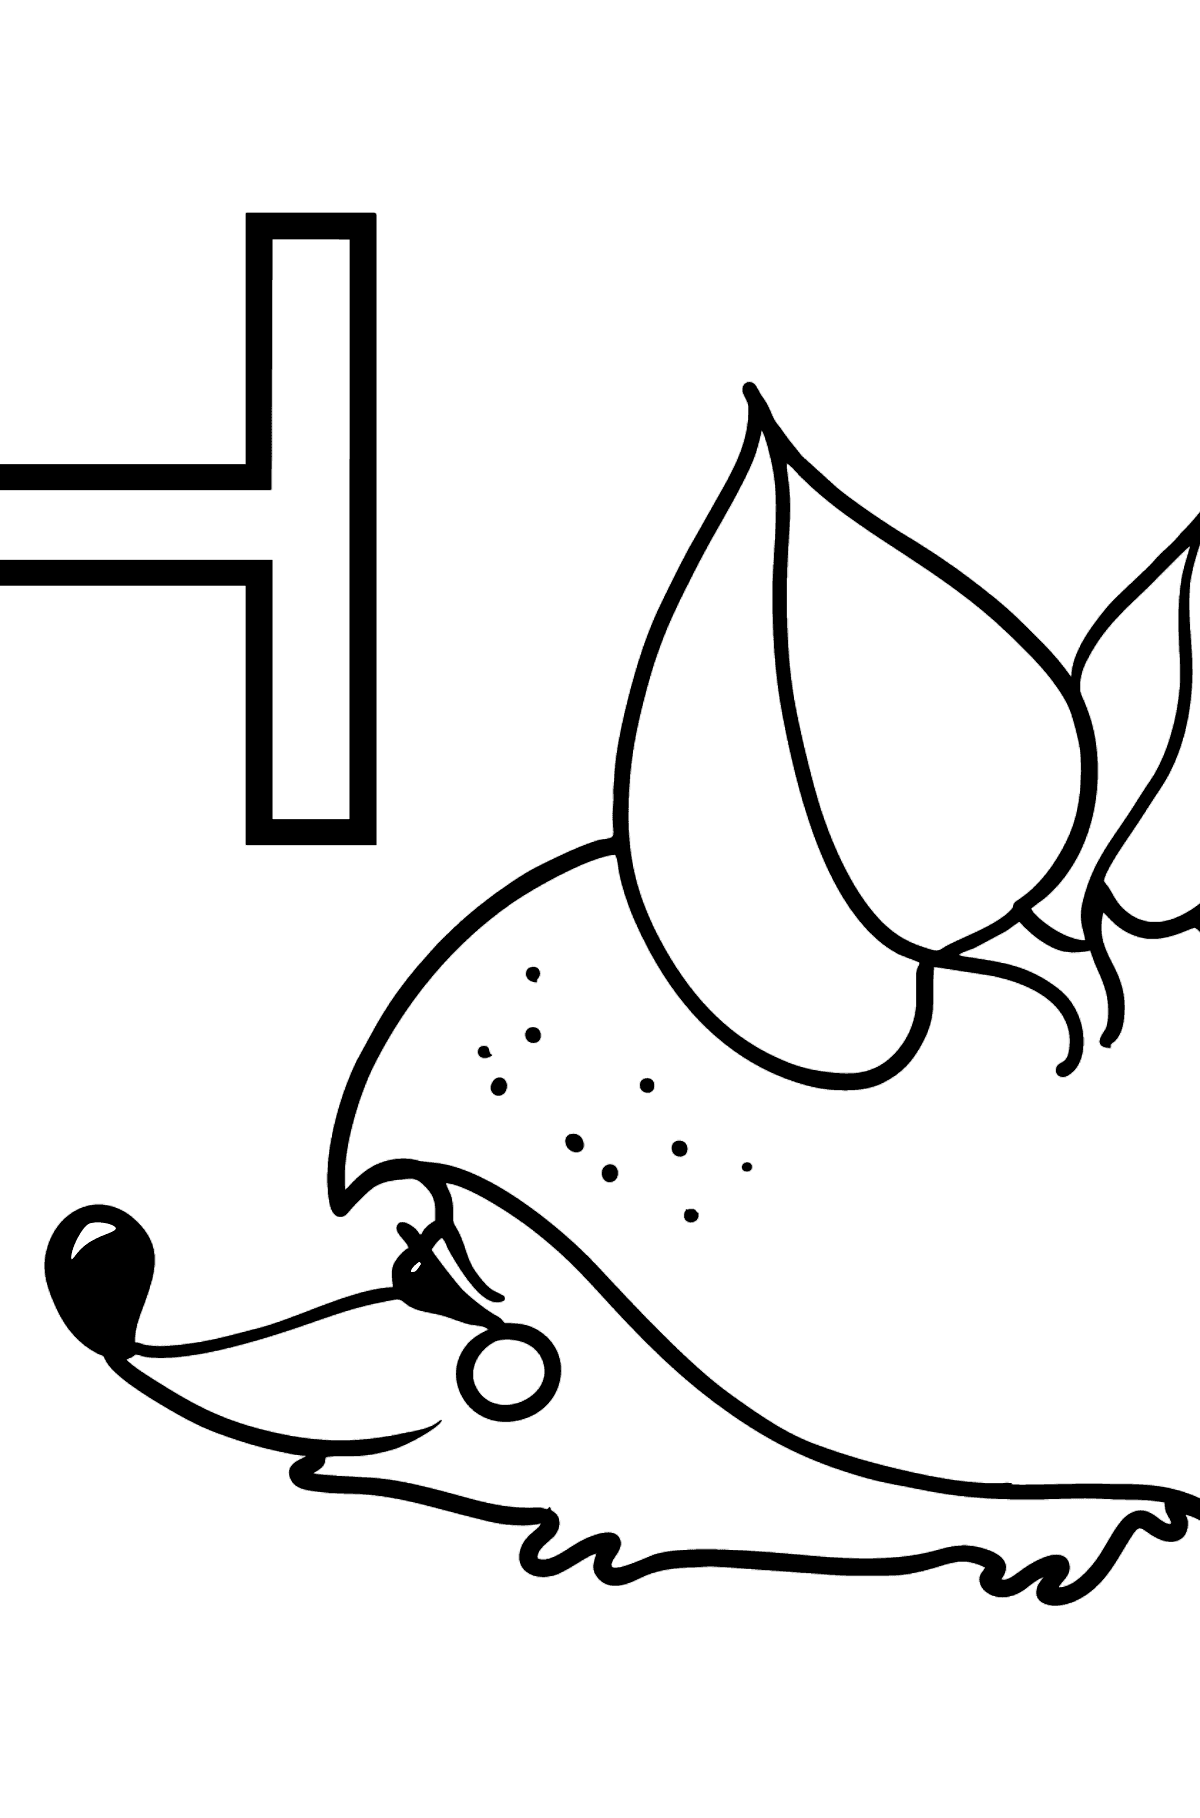 English Letter H coloring pages - HEDGEHOG - Coloring Pages for Kids